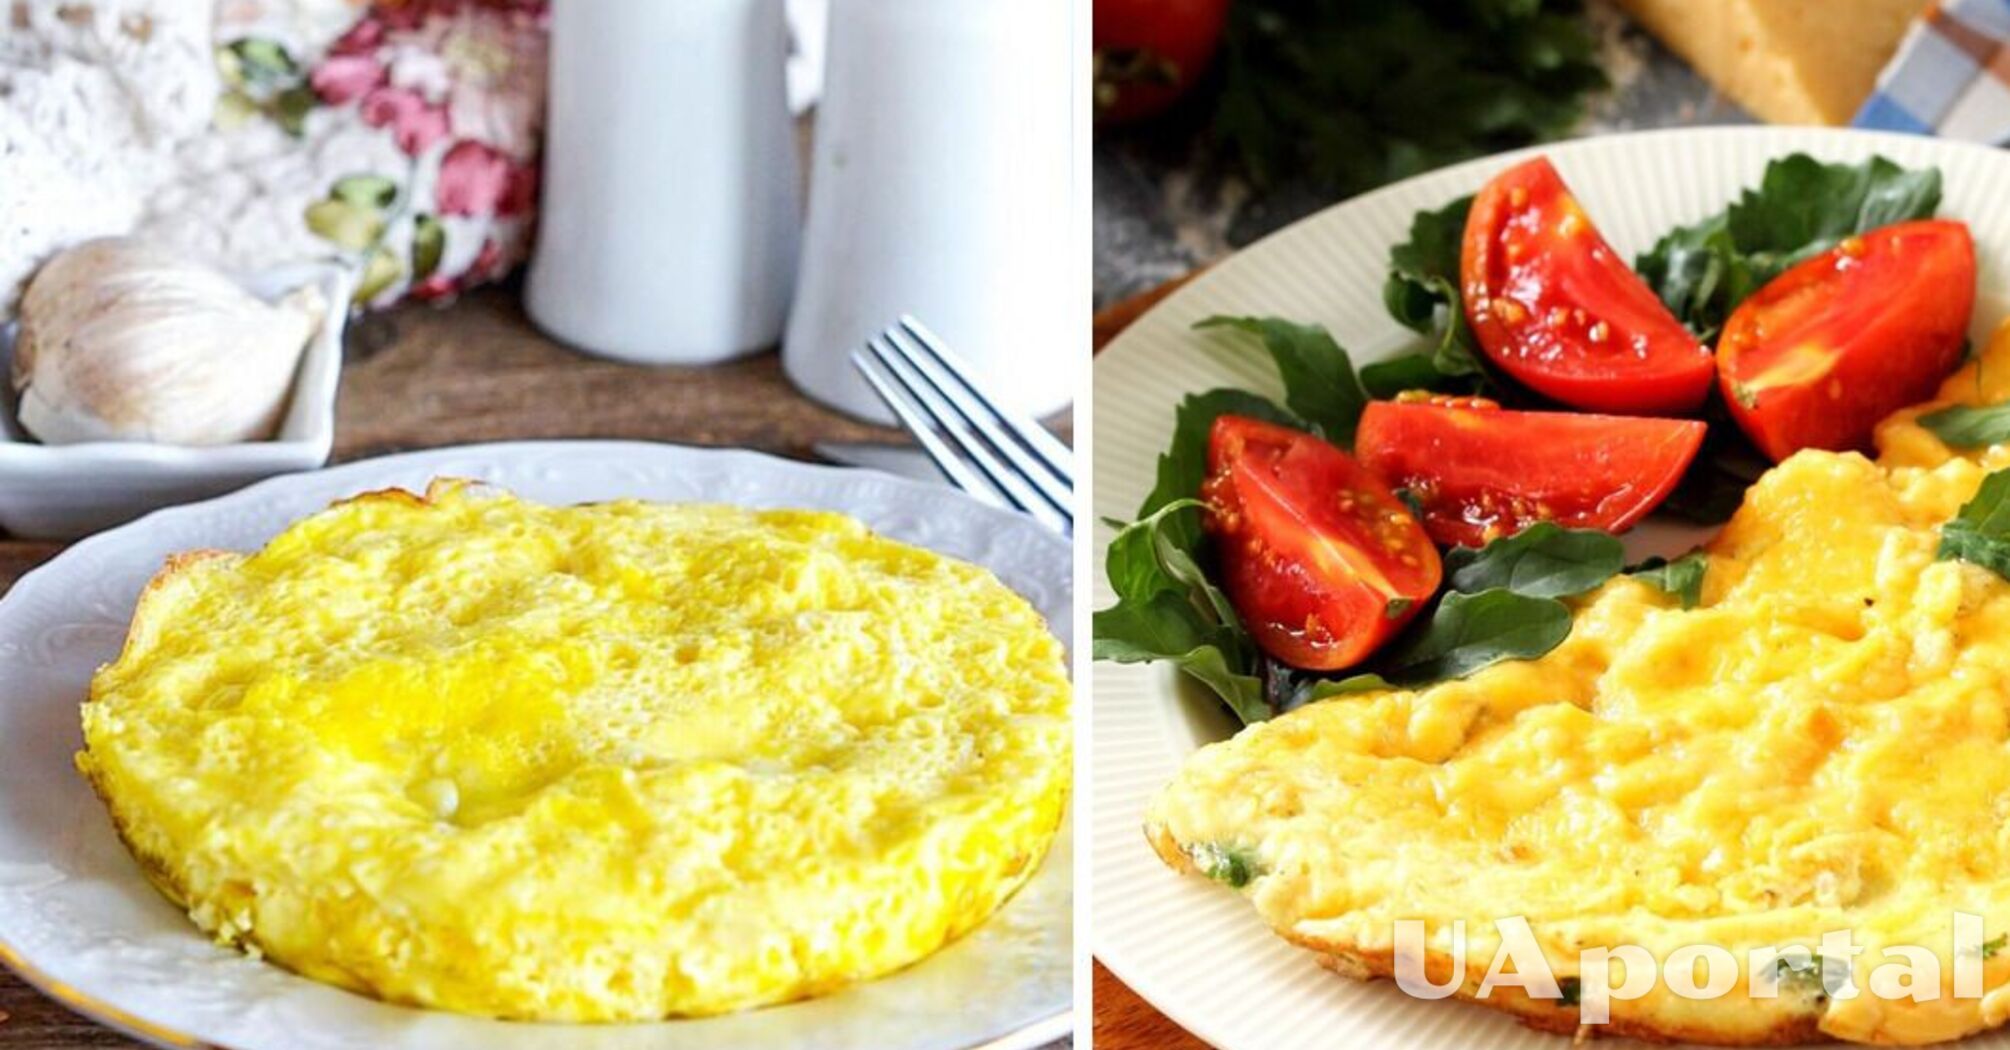 How to replace milk in an omelet without affecting the taste: tips from housewives